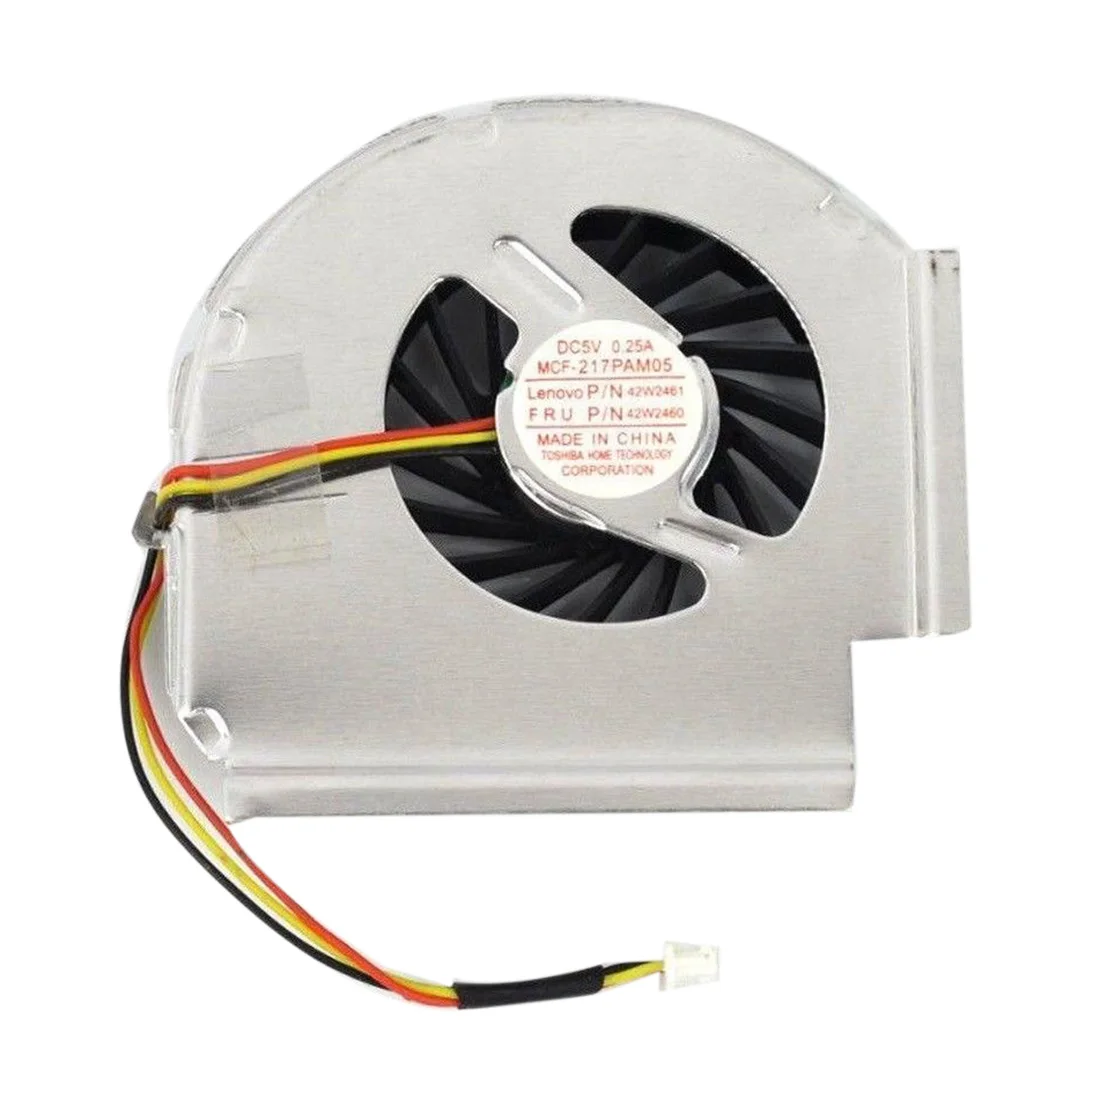 

New CPU Cooling Fan For IBM Lenovo Thinkpad T61 T61P R61 W500 T500 T400 3 Pin